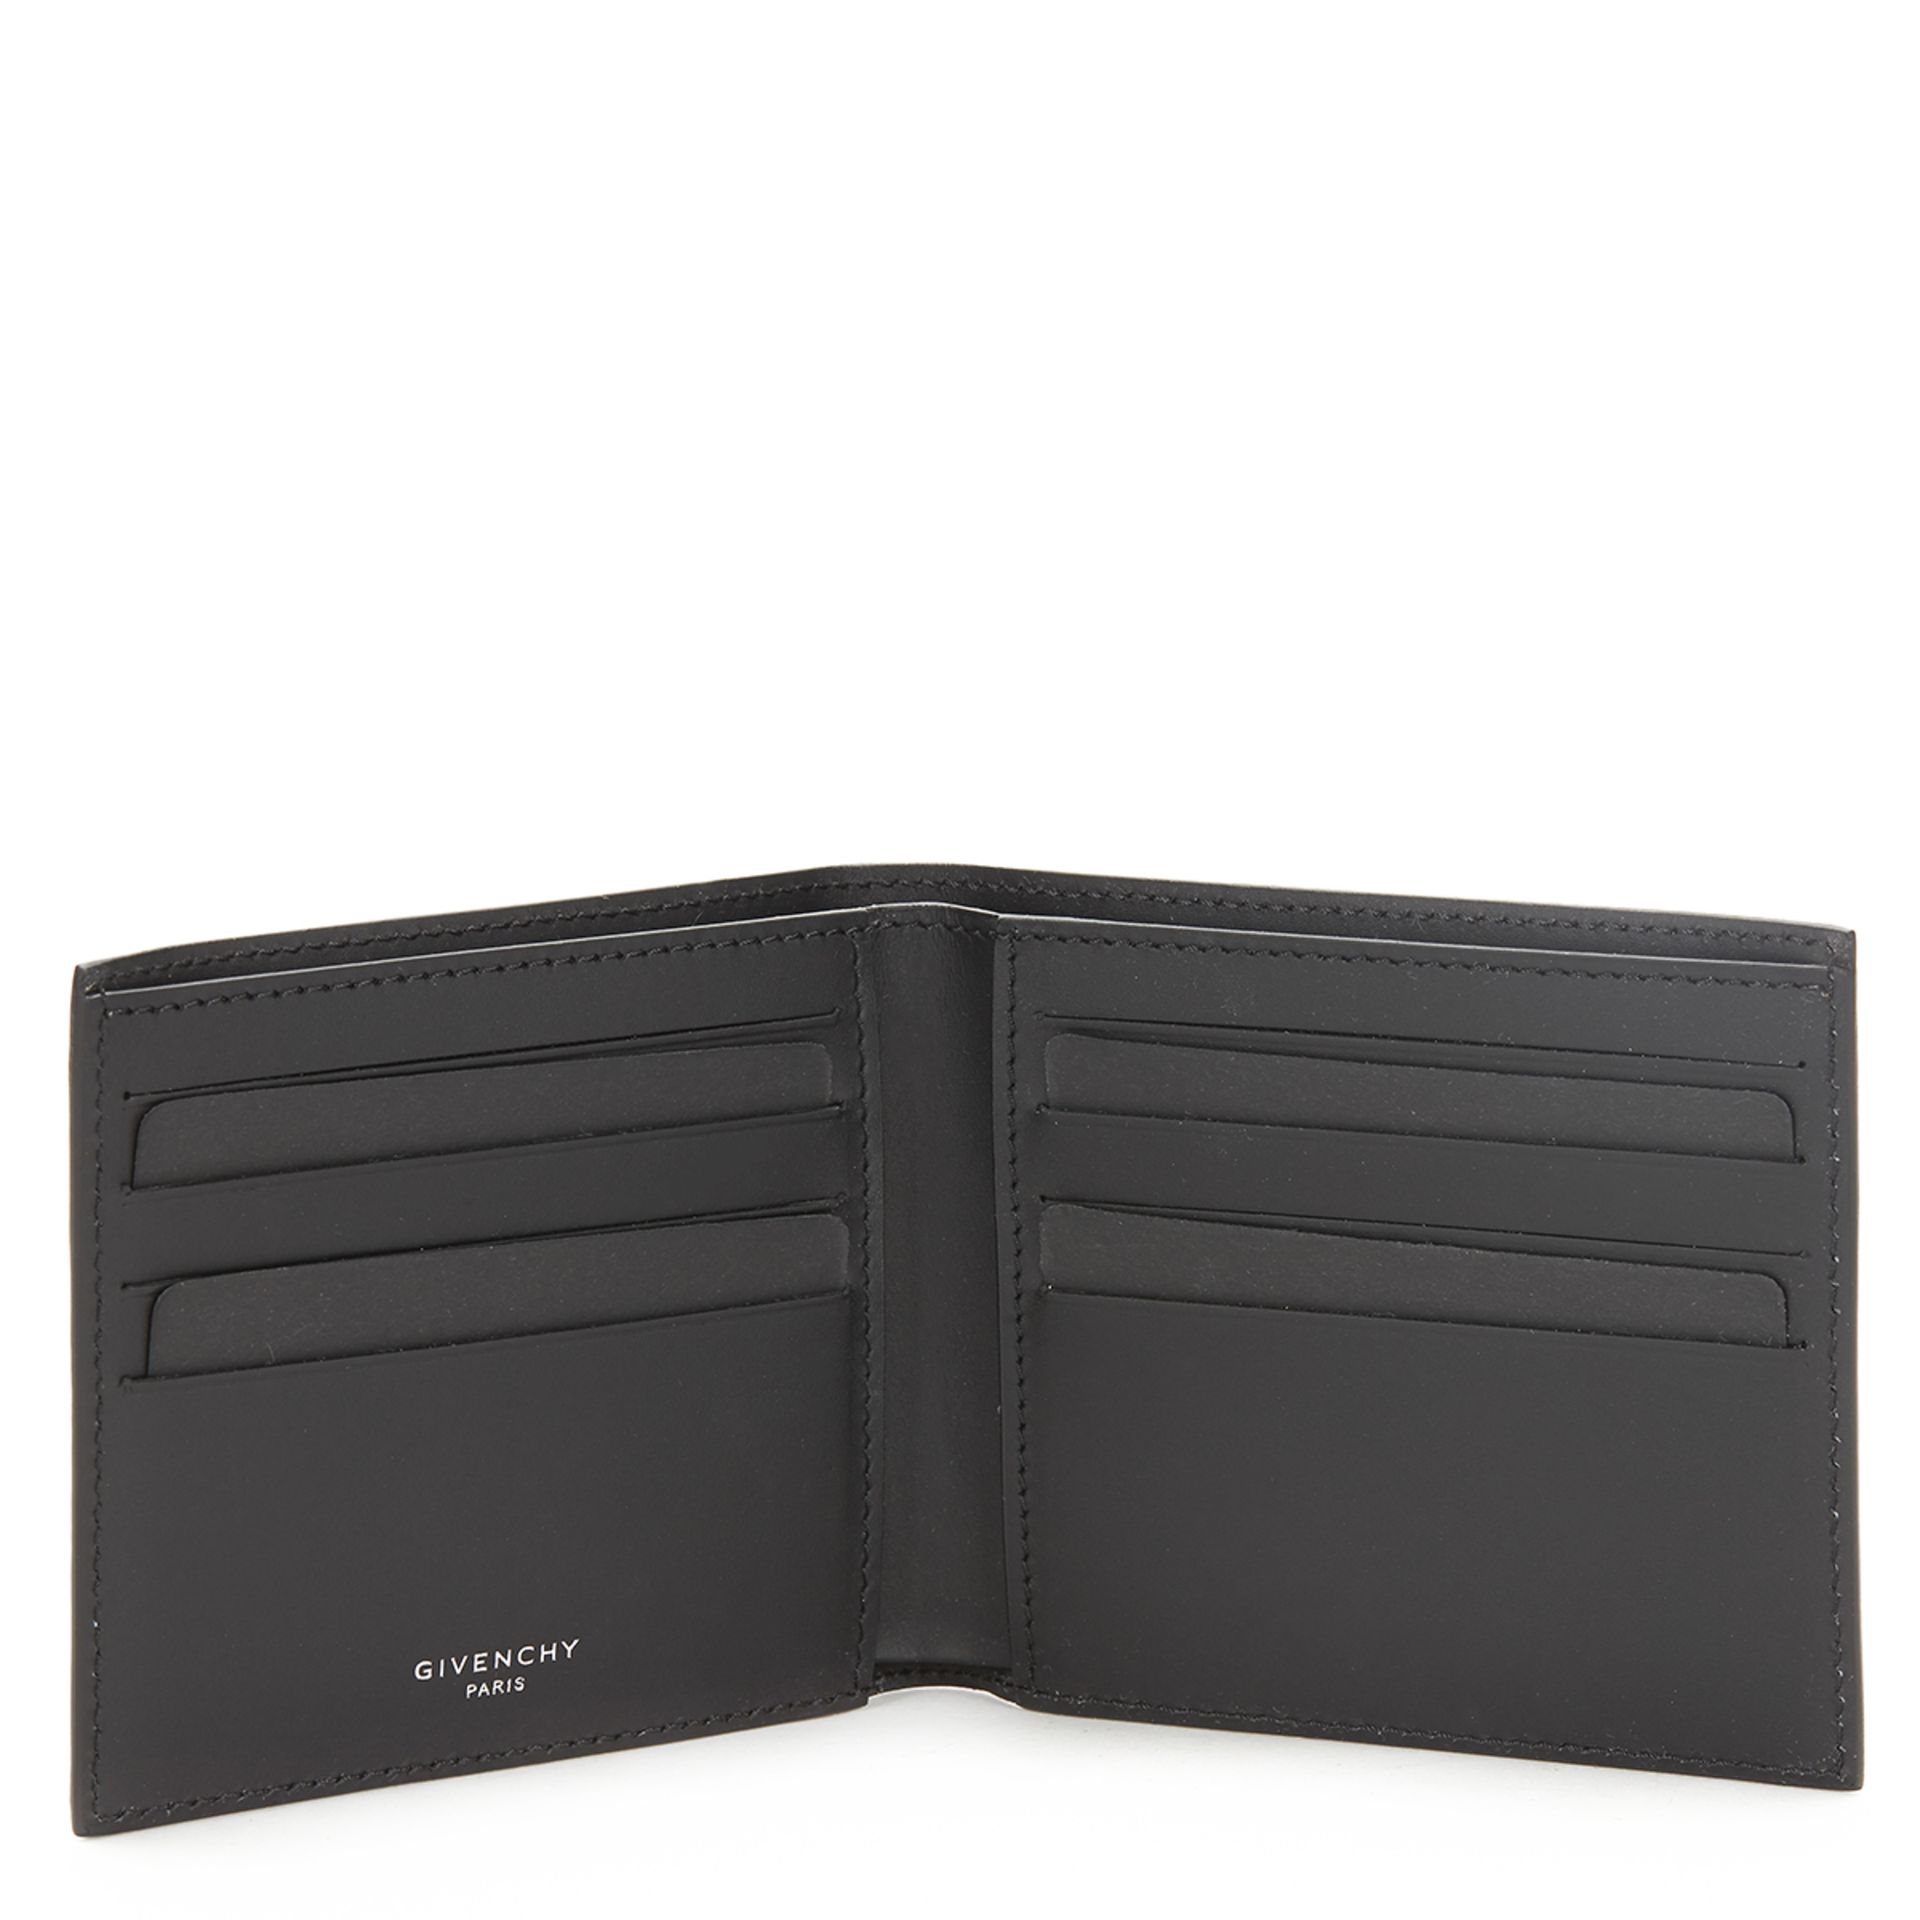 Givenchy, Classic Single Bill Wallet - Image 3 of 5